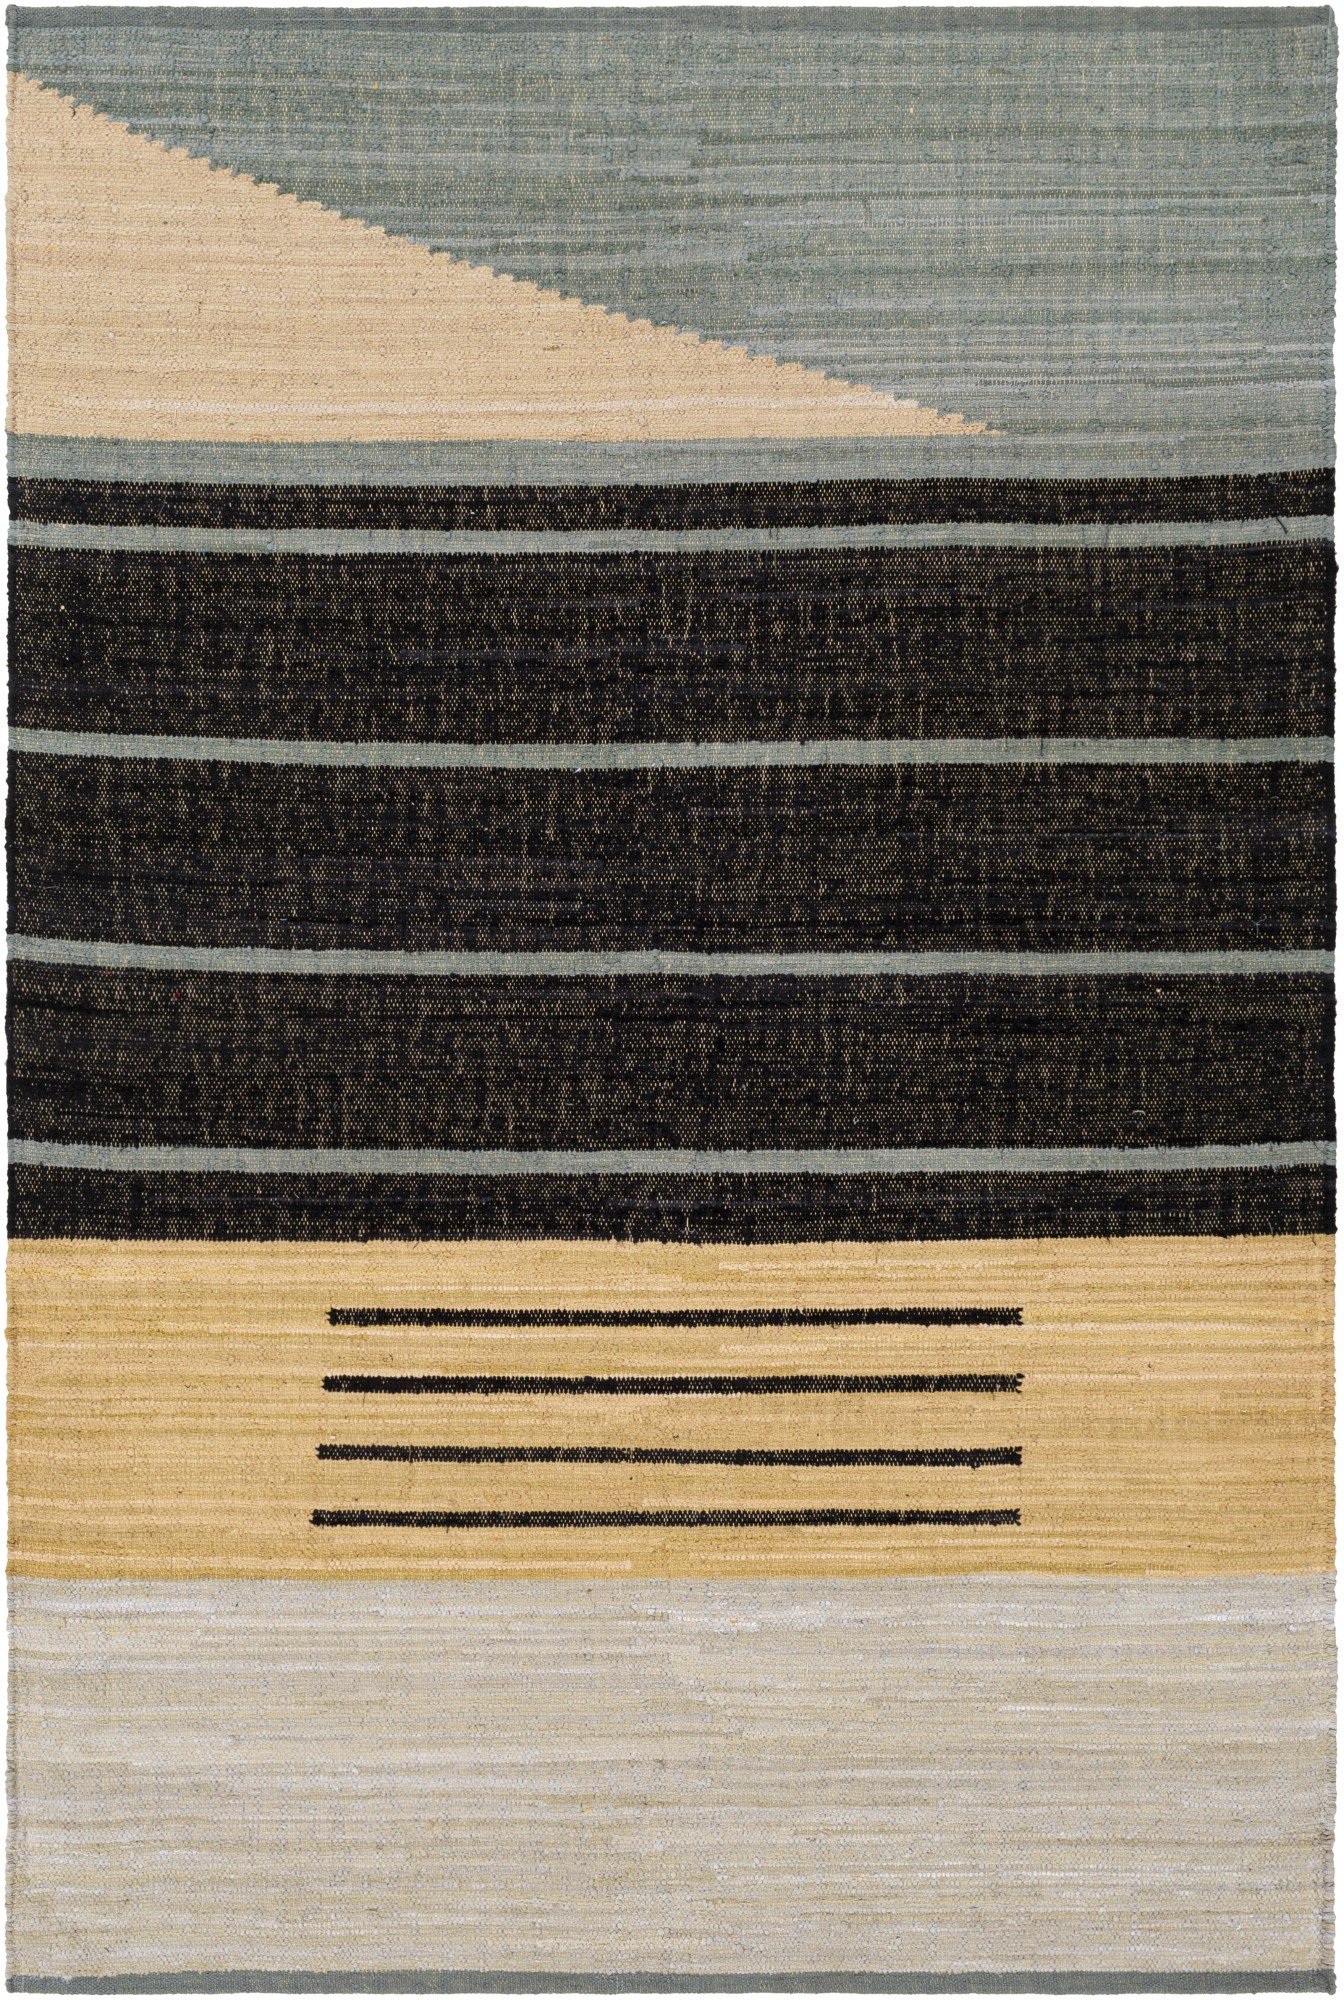 Striped Cotton Rugs Direct, Striped Cotton Area Rugs